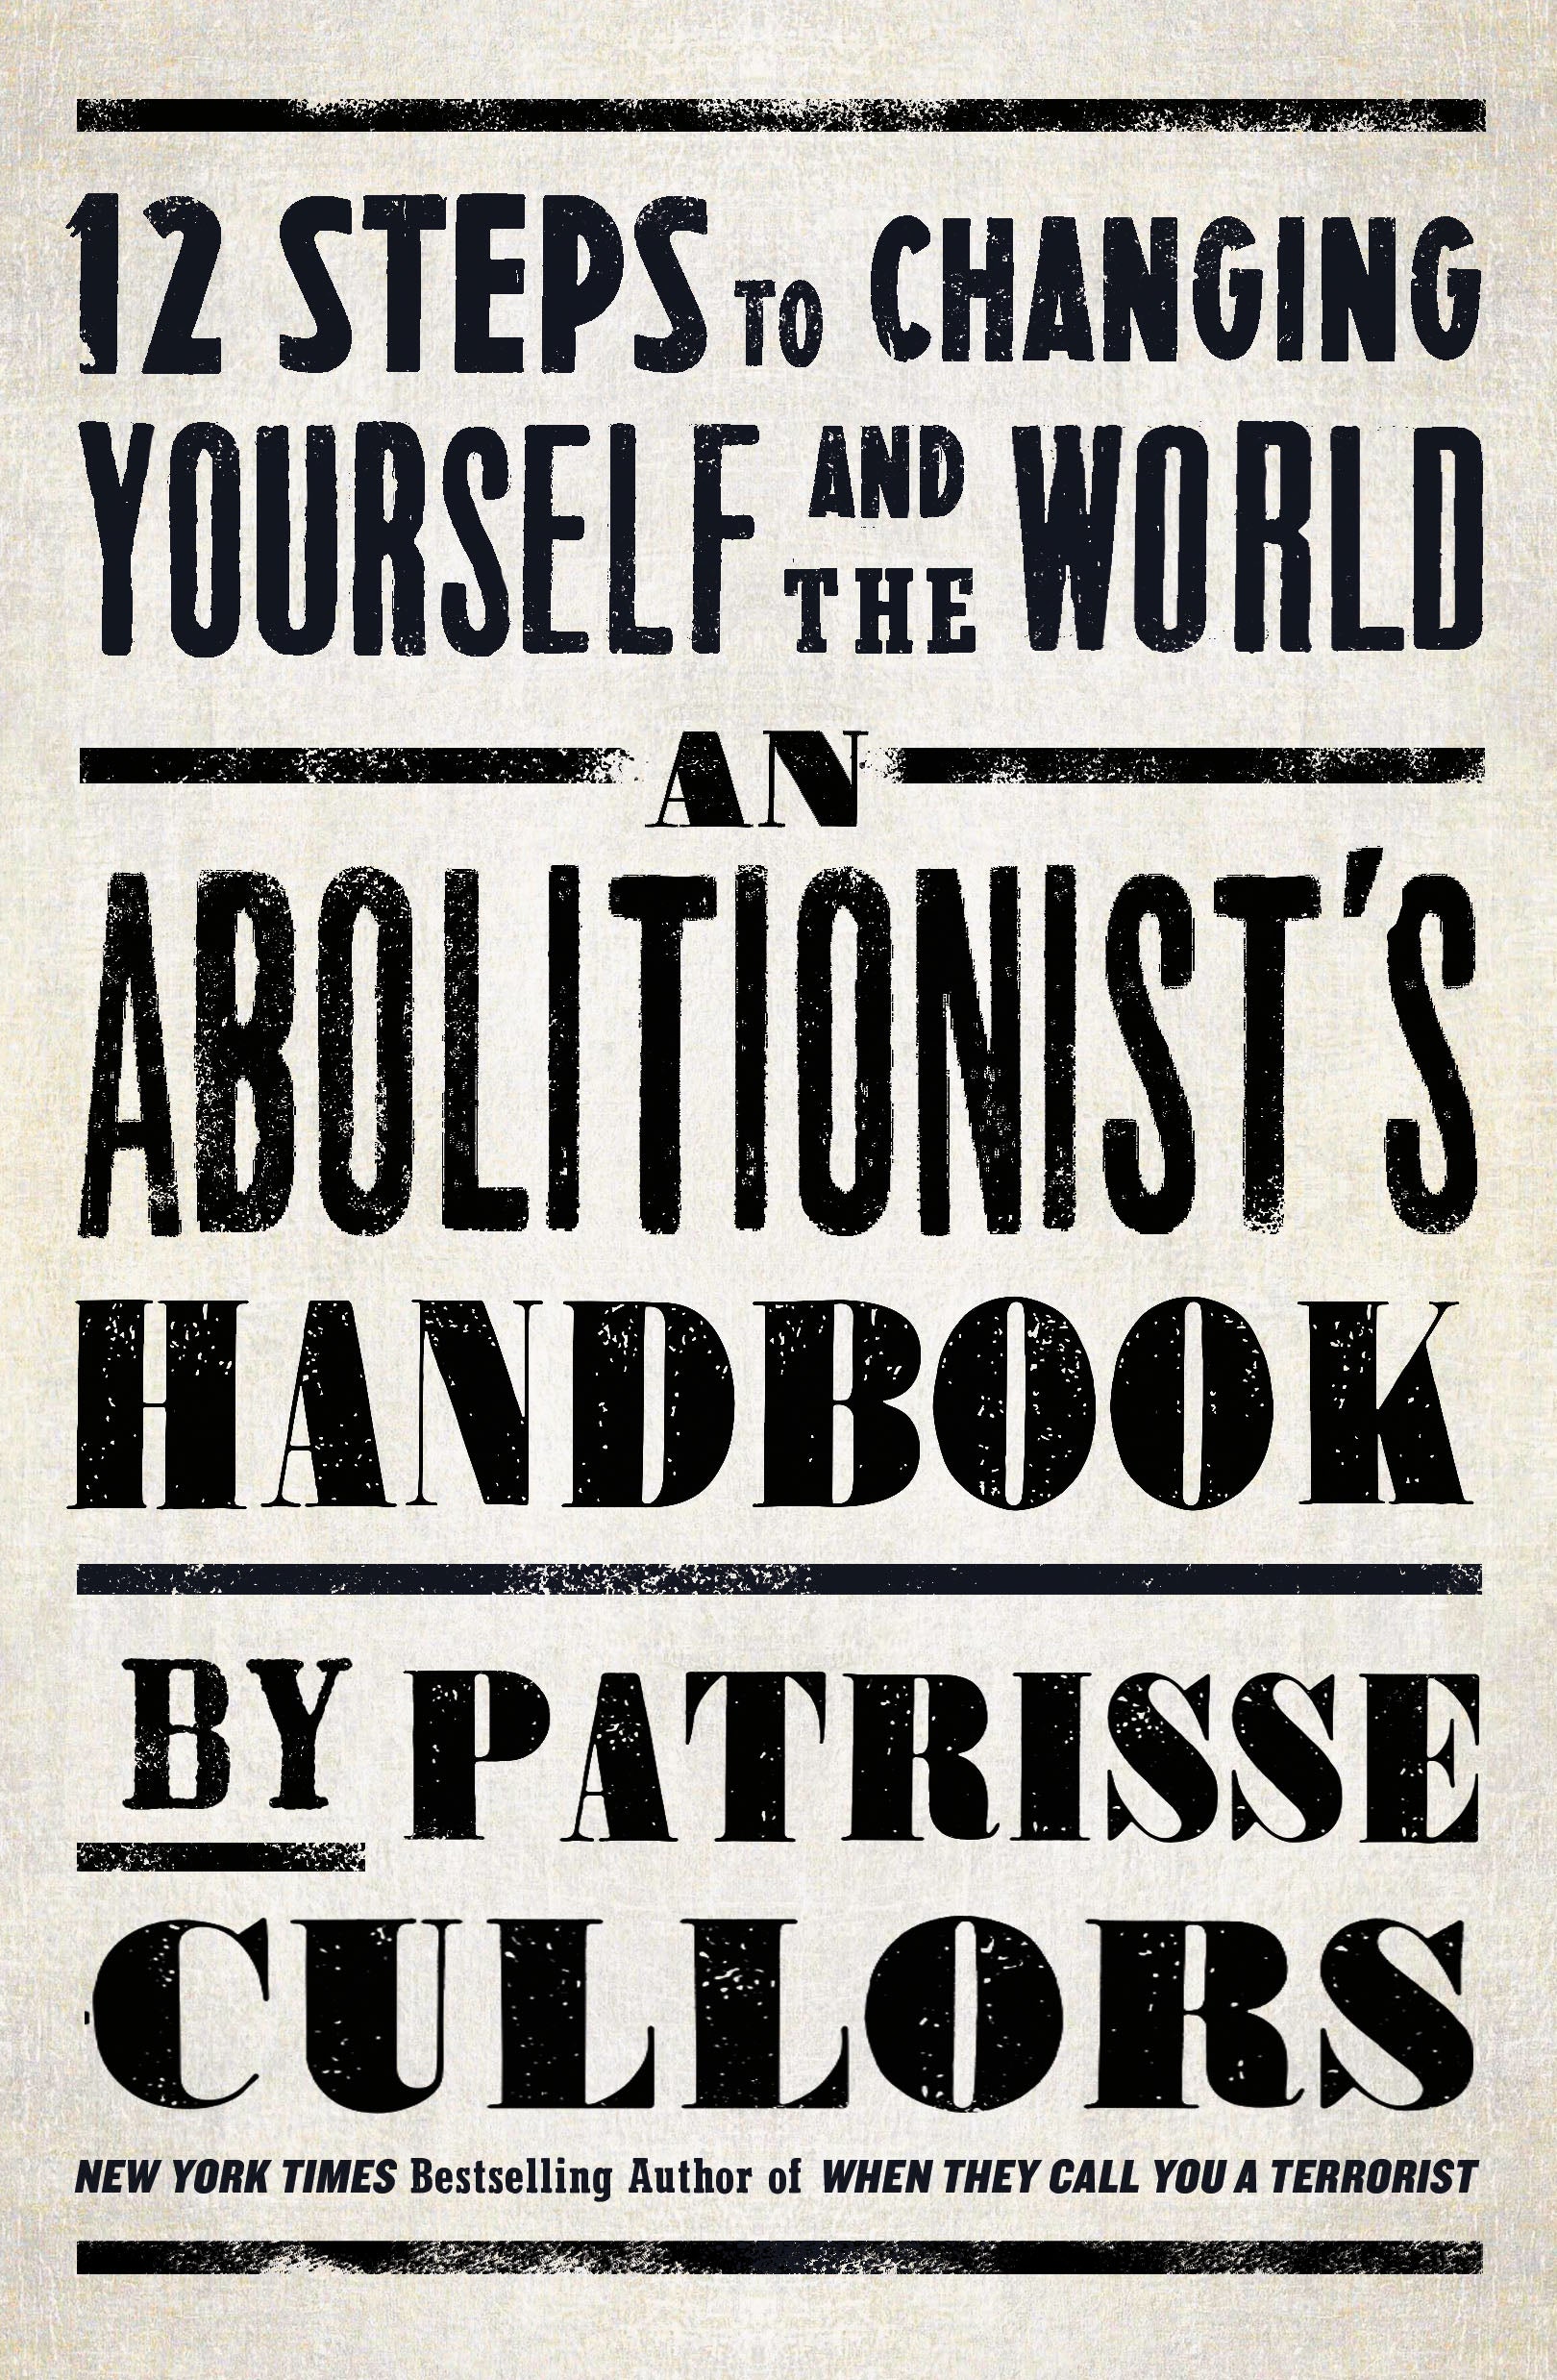 First Look At Patrisse Cullors’ New Book ‘An Abolitionist’s Handbook’